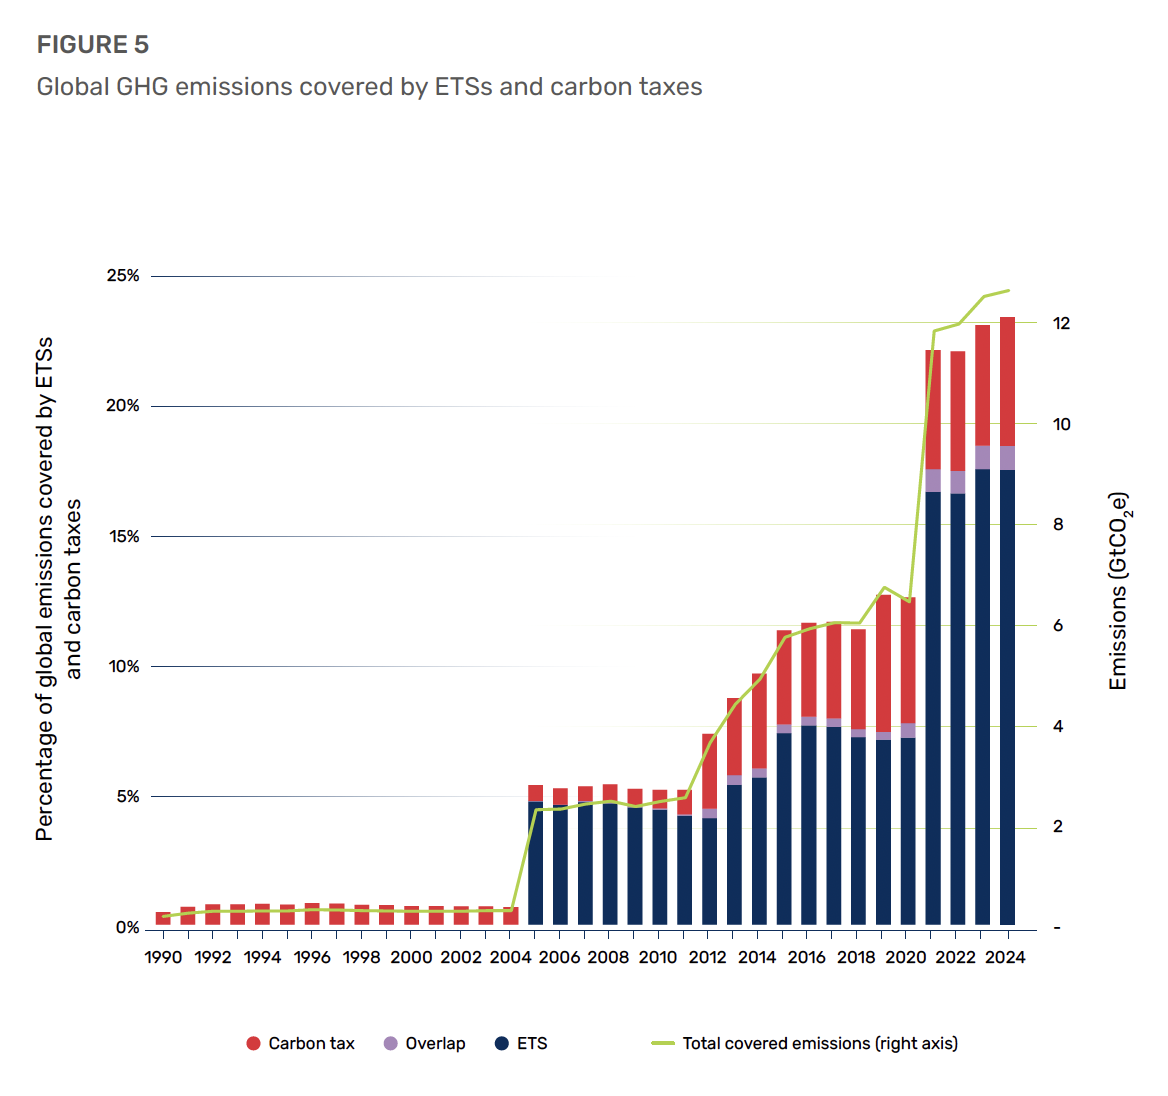 Global GHG emissions covered by ETSs and carbon taxes